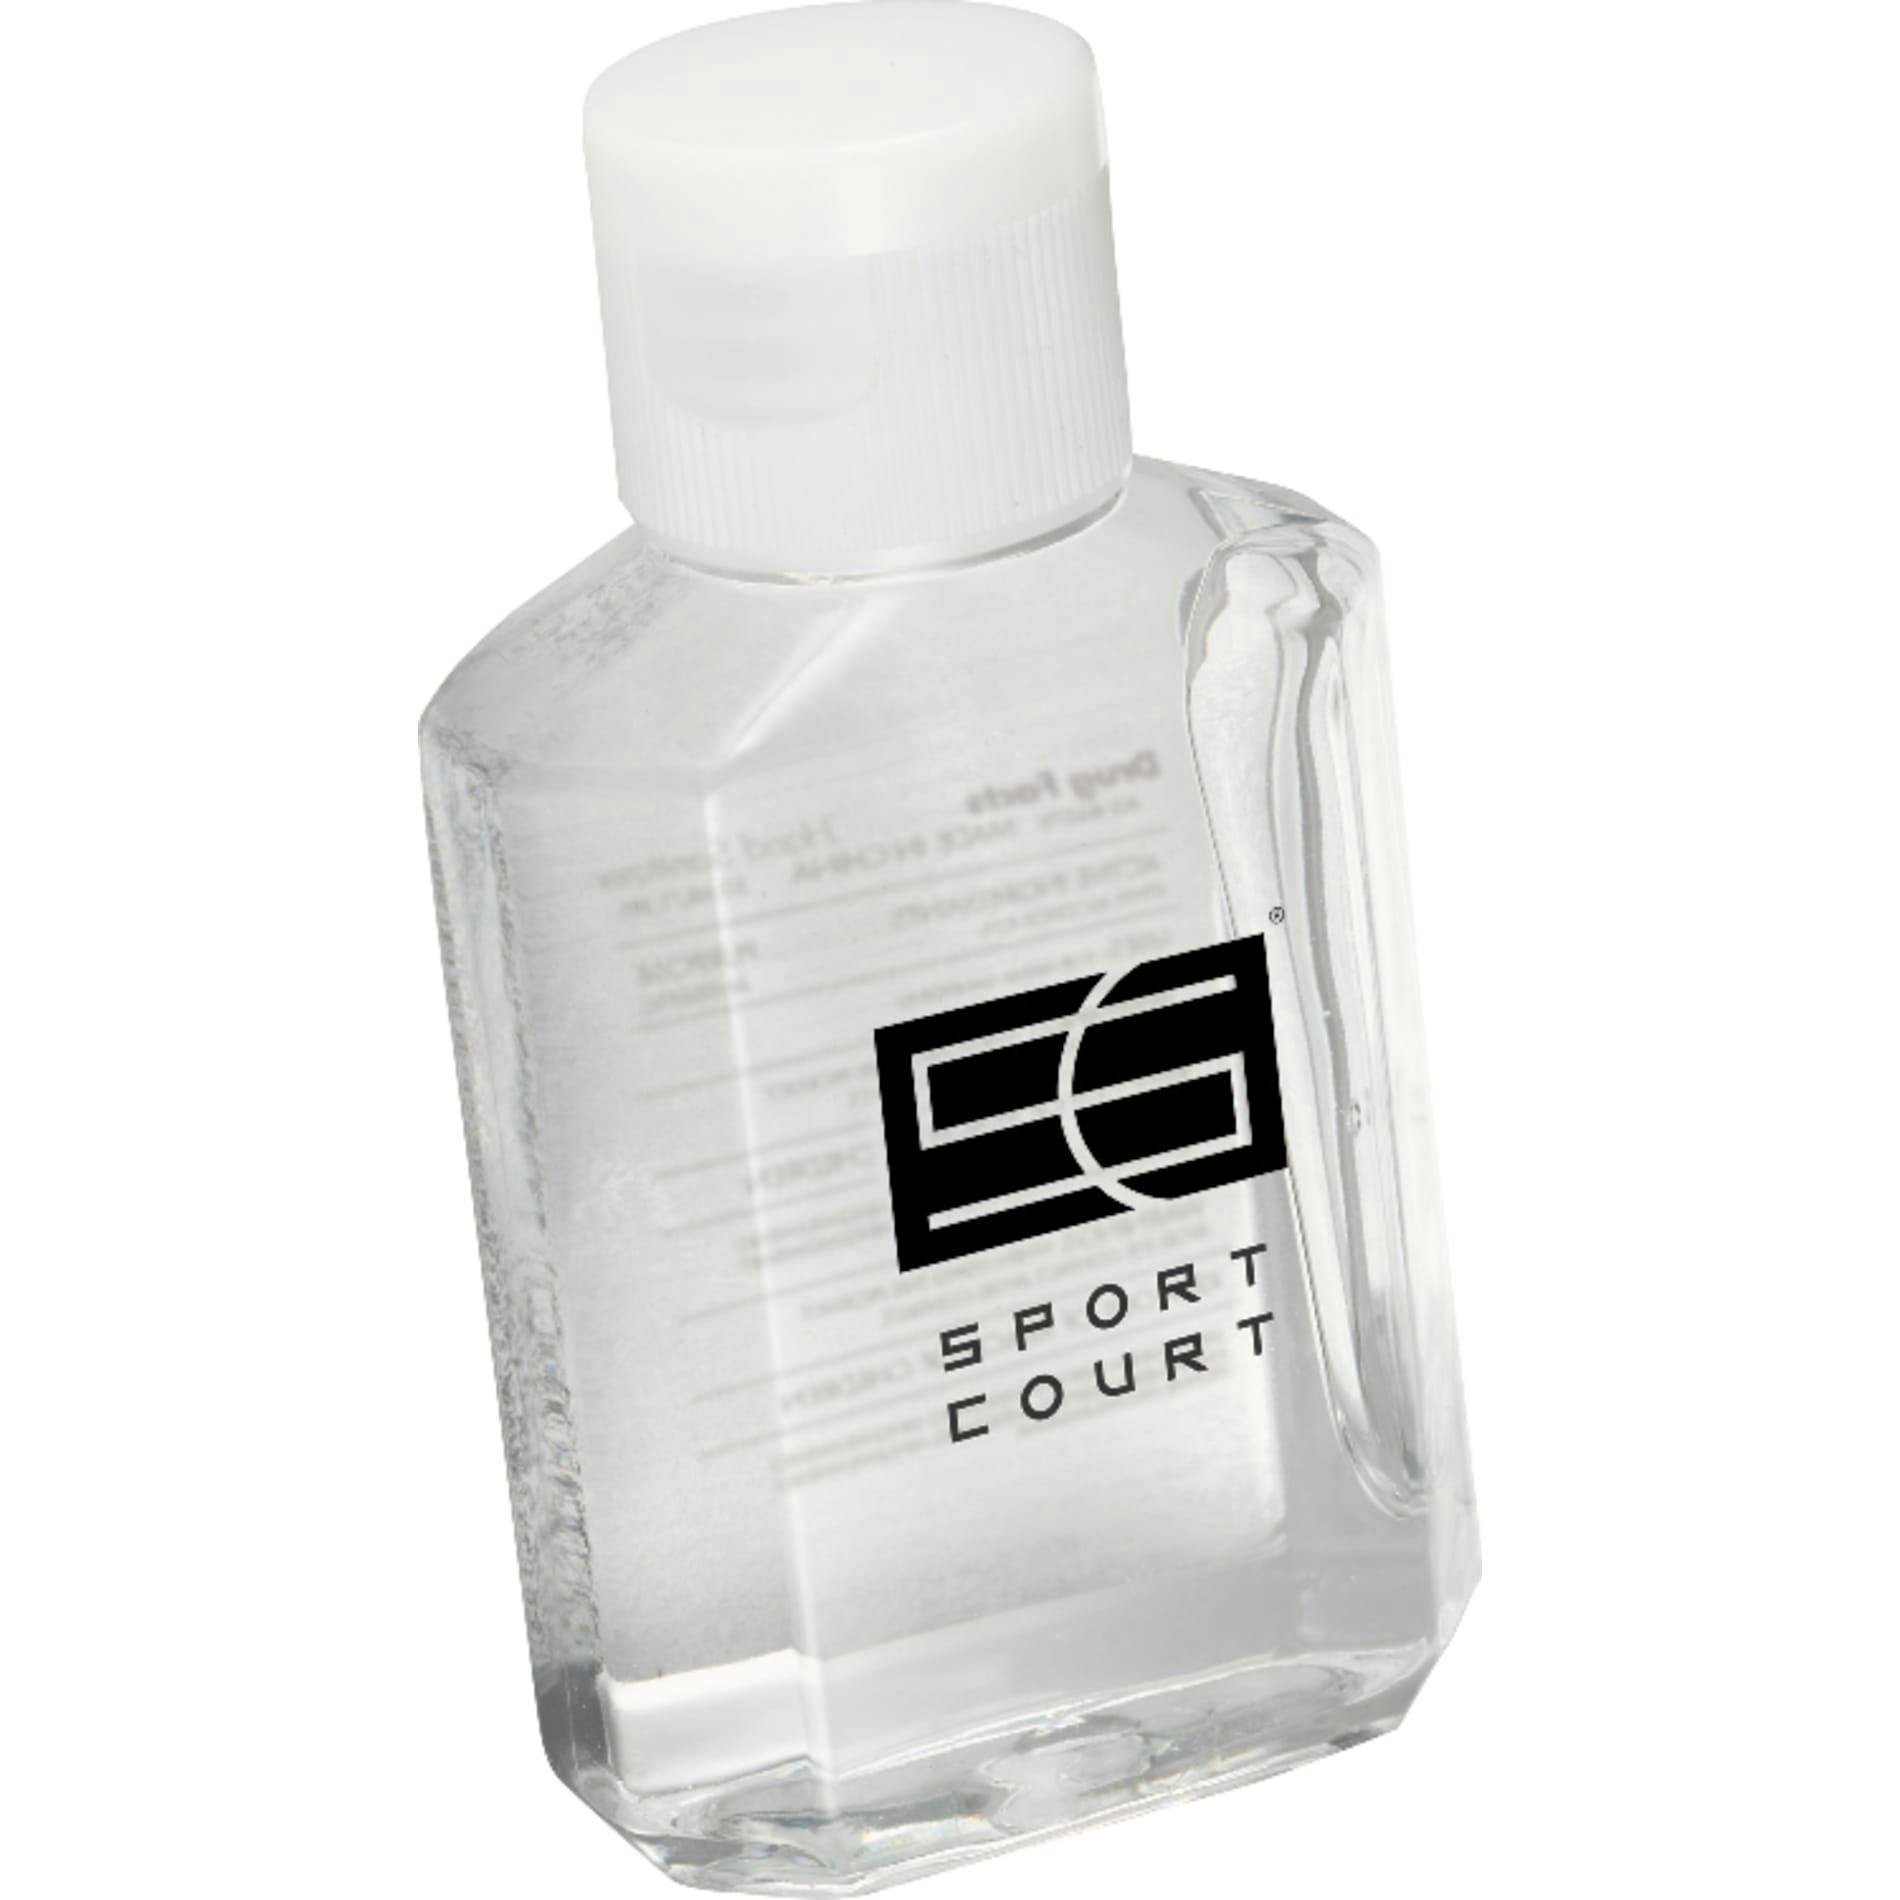 2oz Squirt Hand Sanitizer - additional Image 3